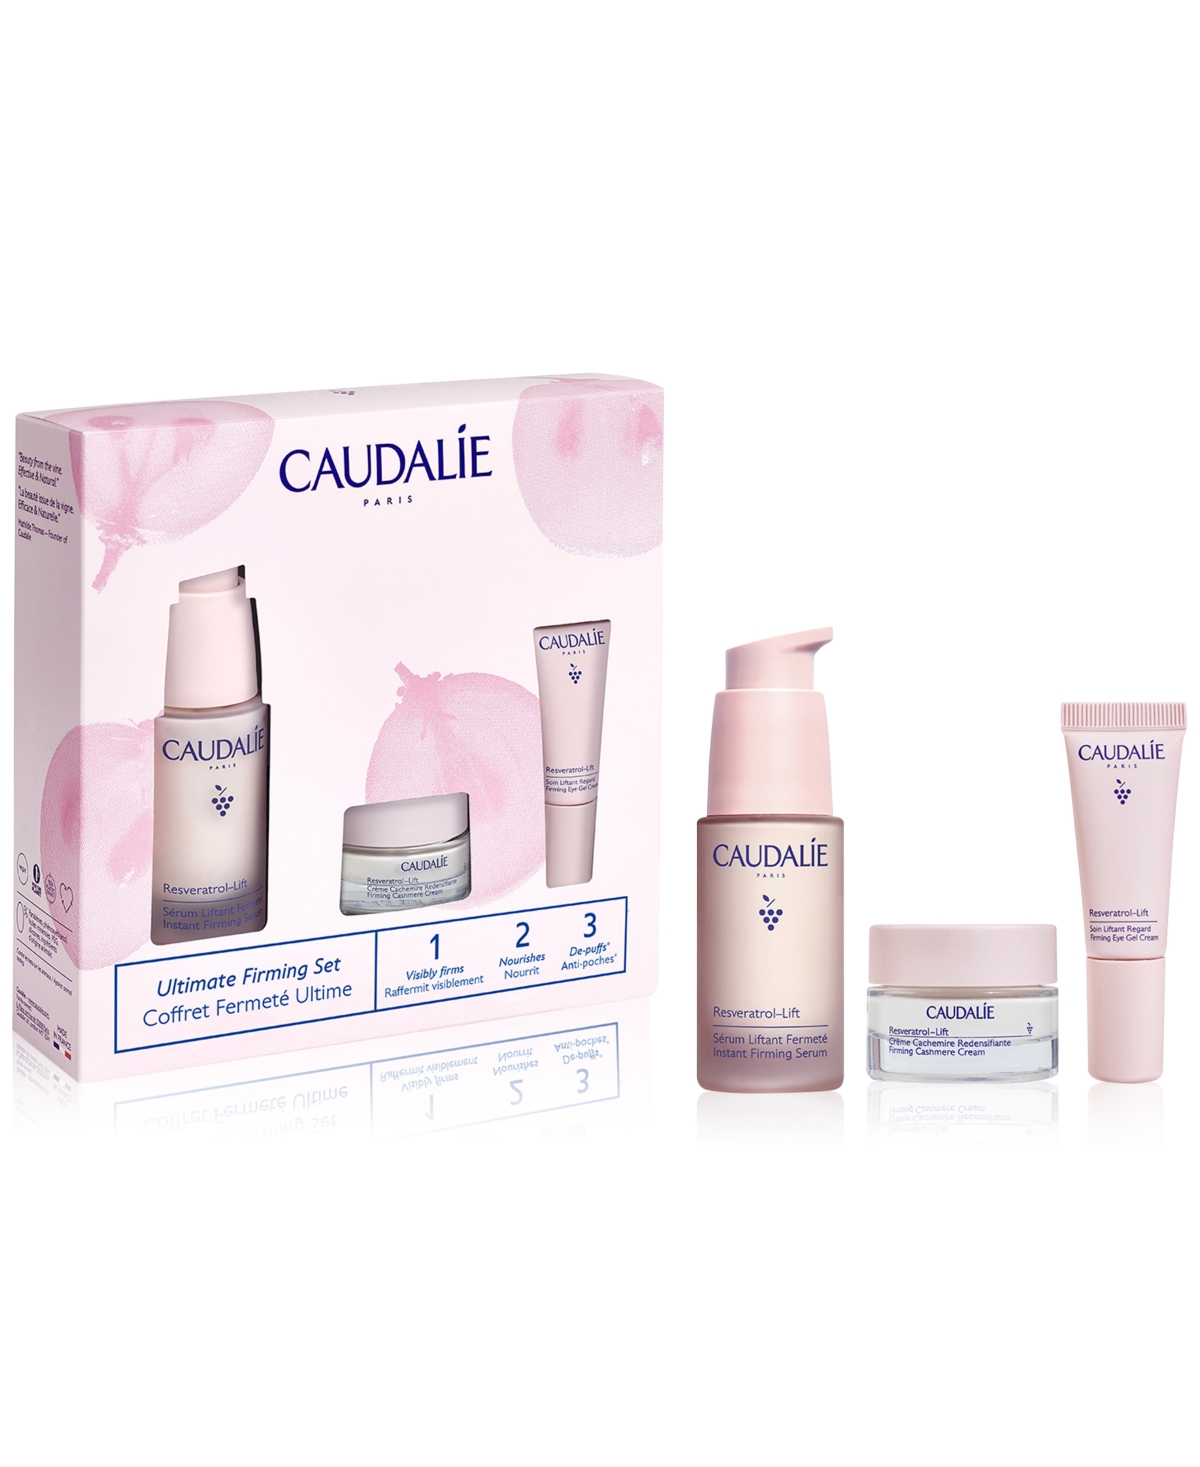 Caudalíe 3-pc. Resveratrol-lift Ultimate Firming Skincare Set In No Color